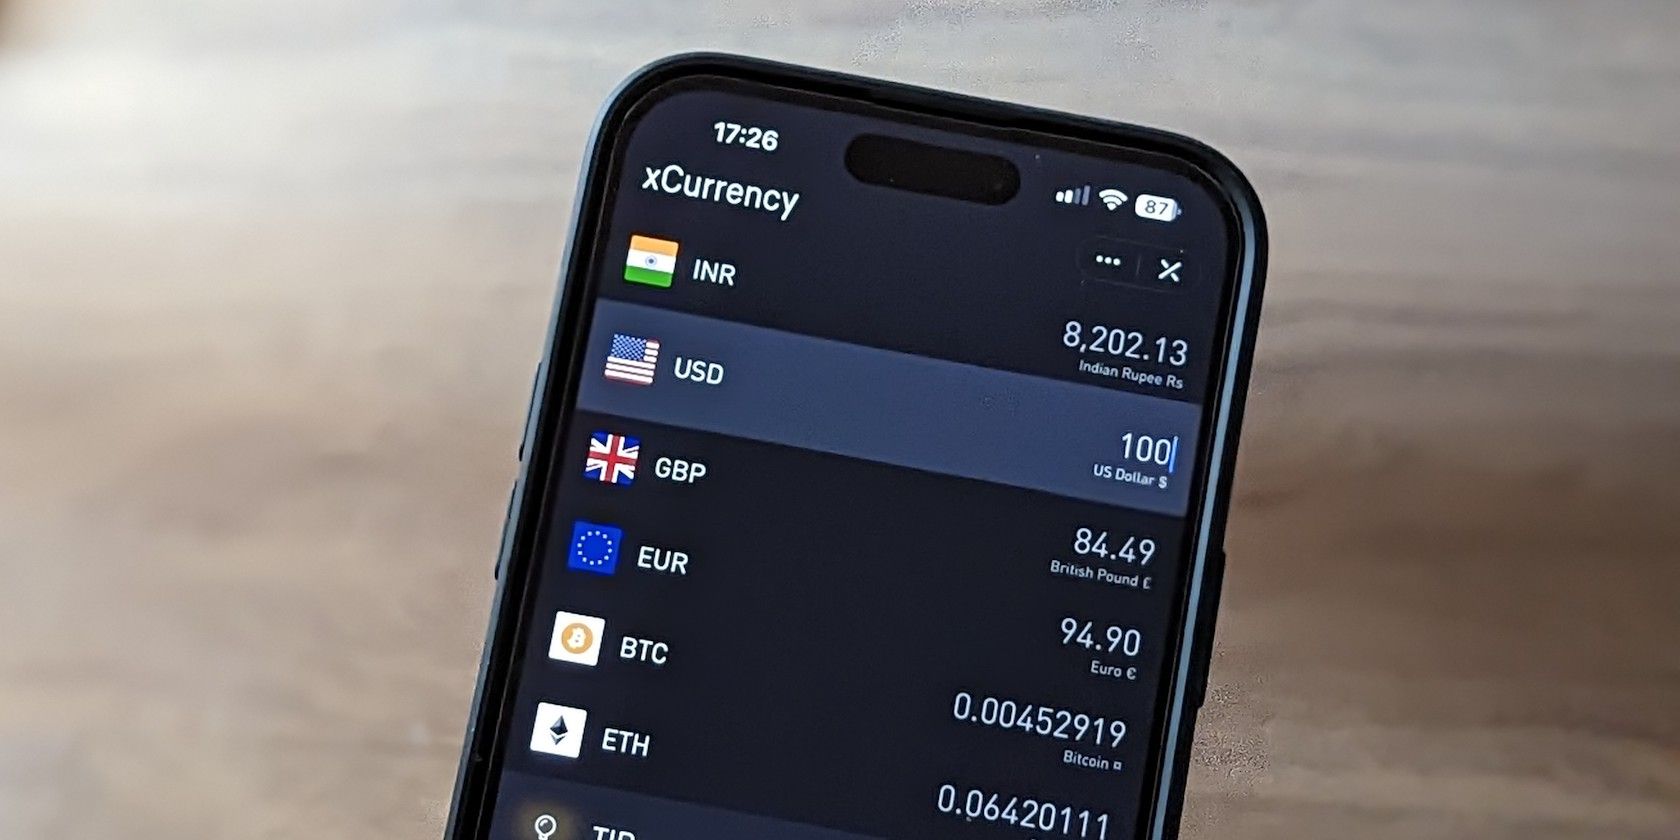 xCurrency app on iPhone